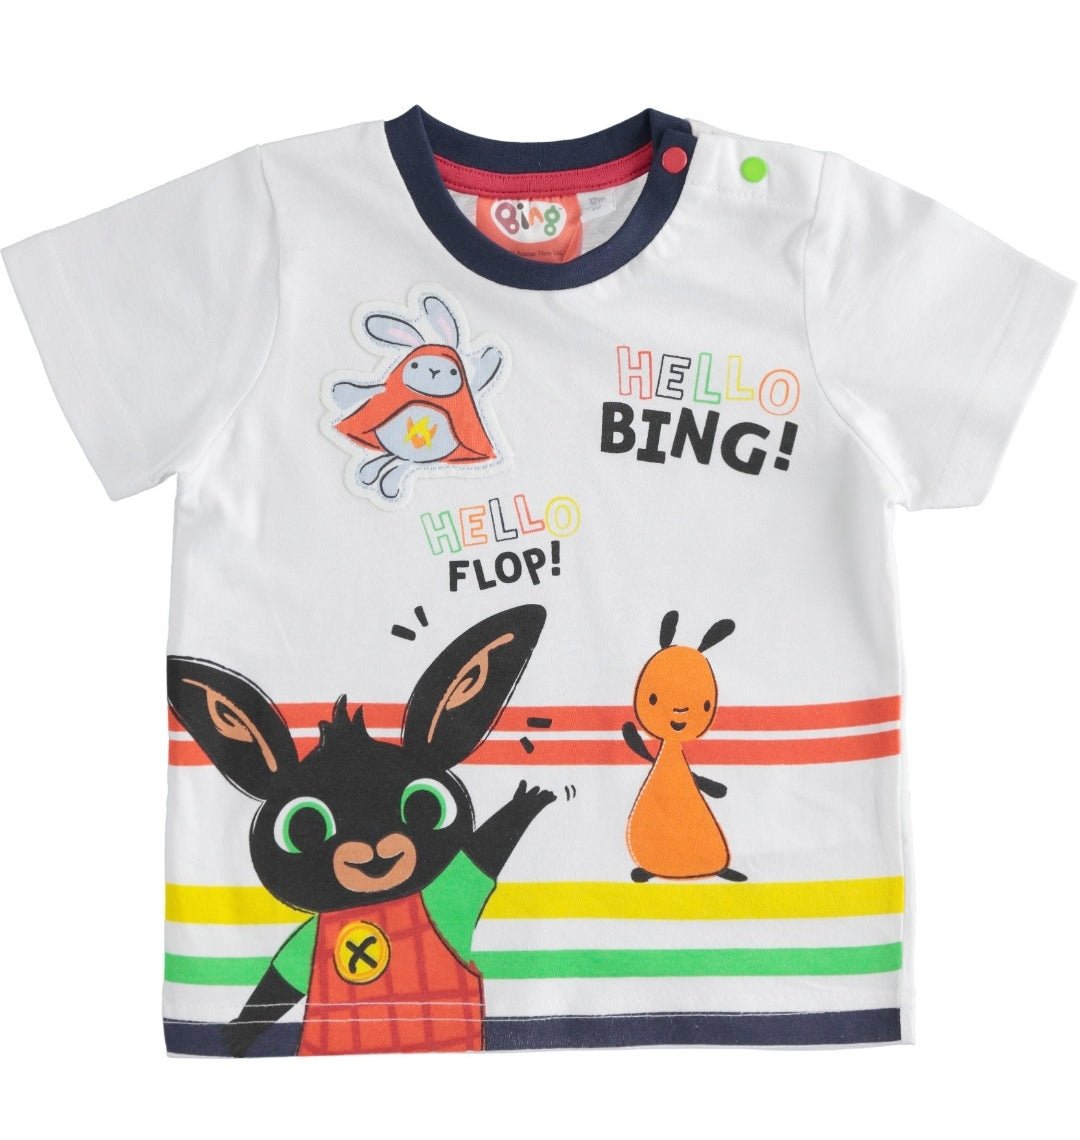 T-Shirt BING - Coccole e Ricami |email: info@coccoleericami.shop| P.Iva 09642670583